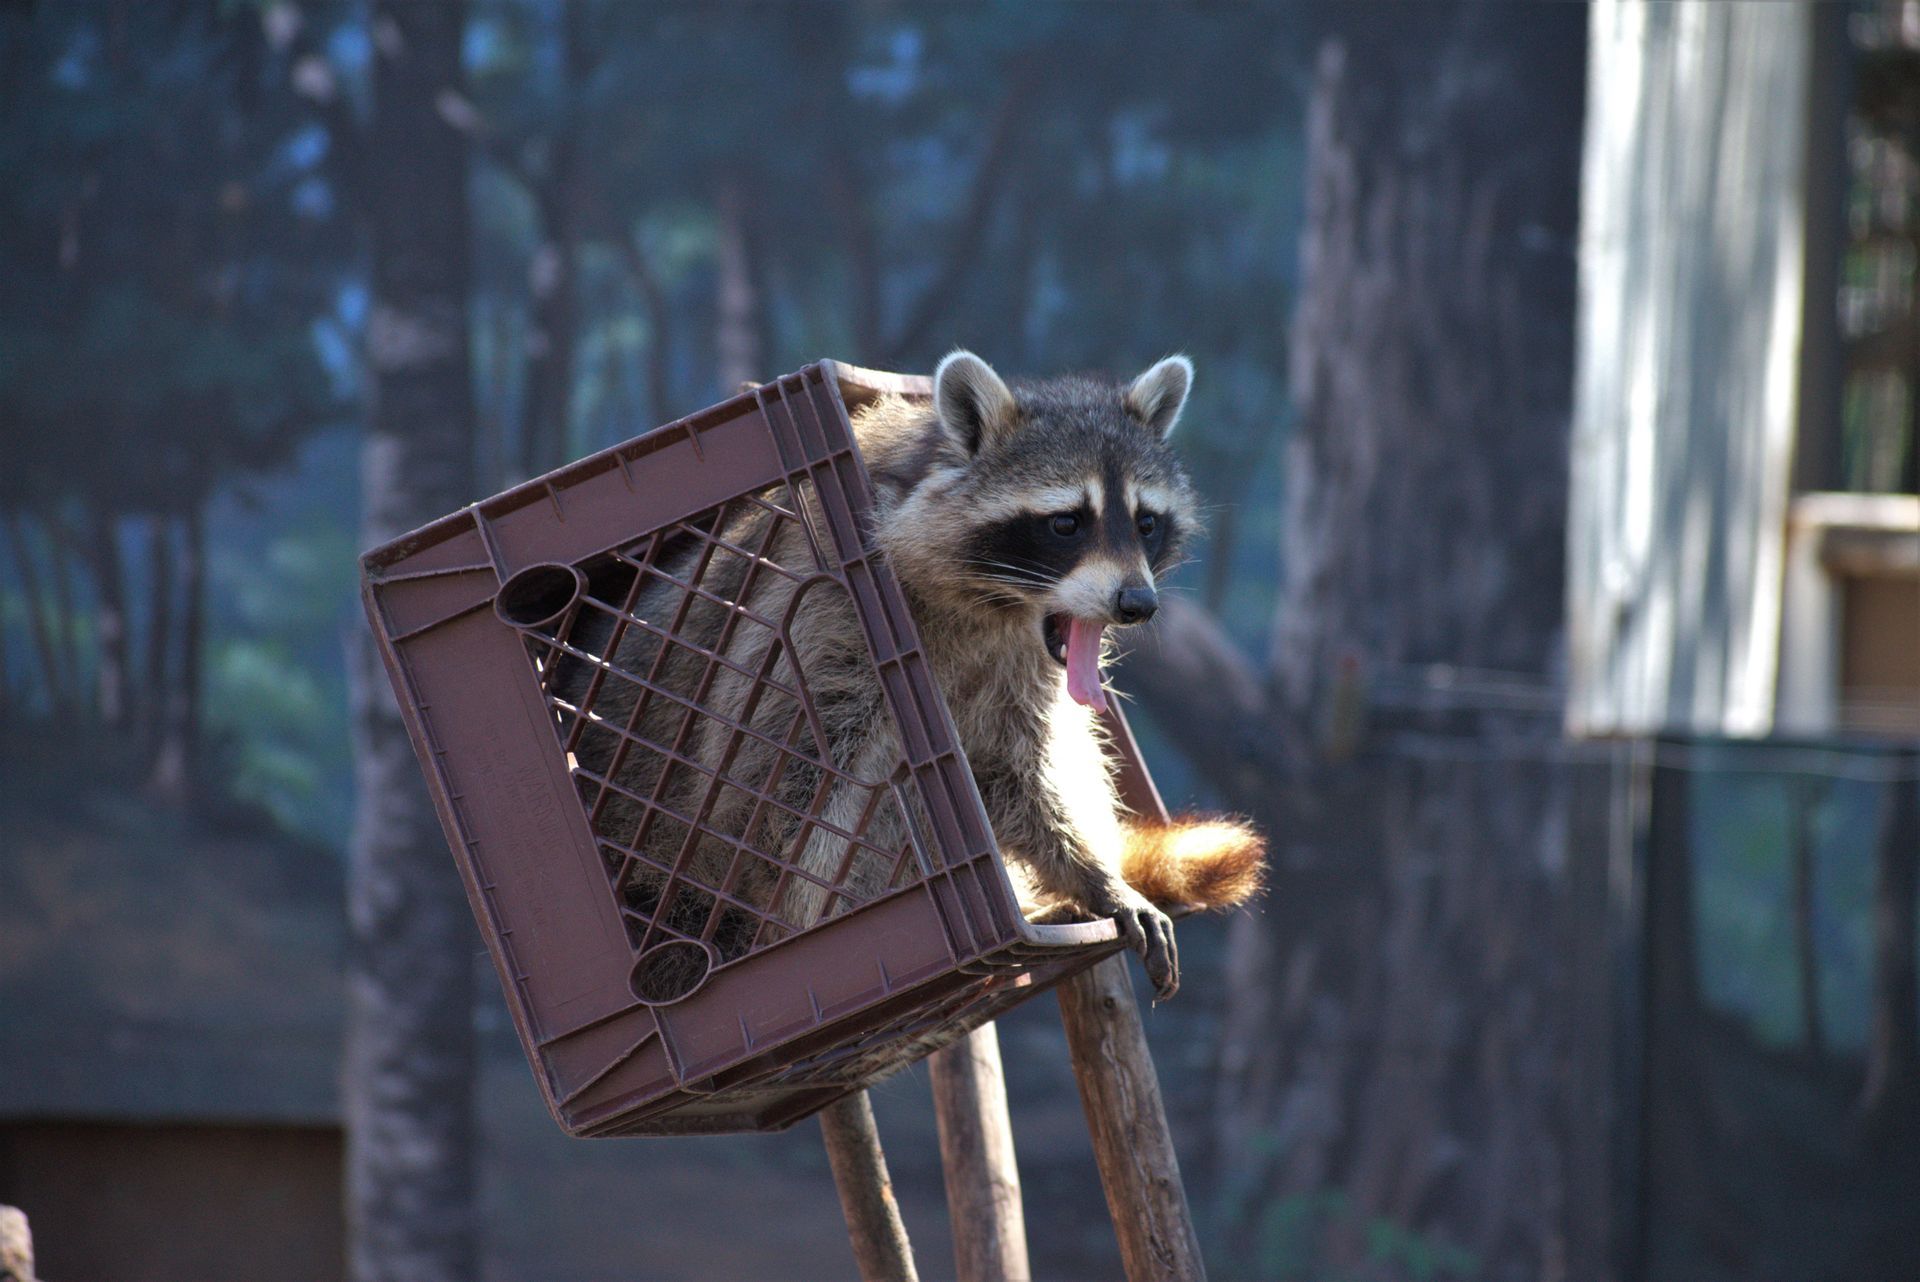 A raccoon is sitting on top of a plastic crate.